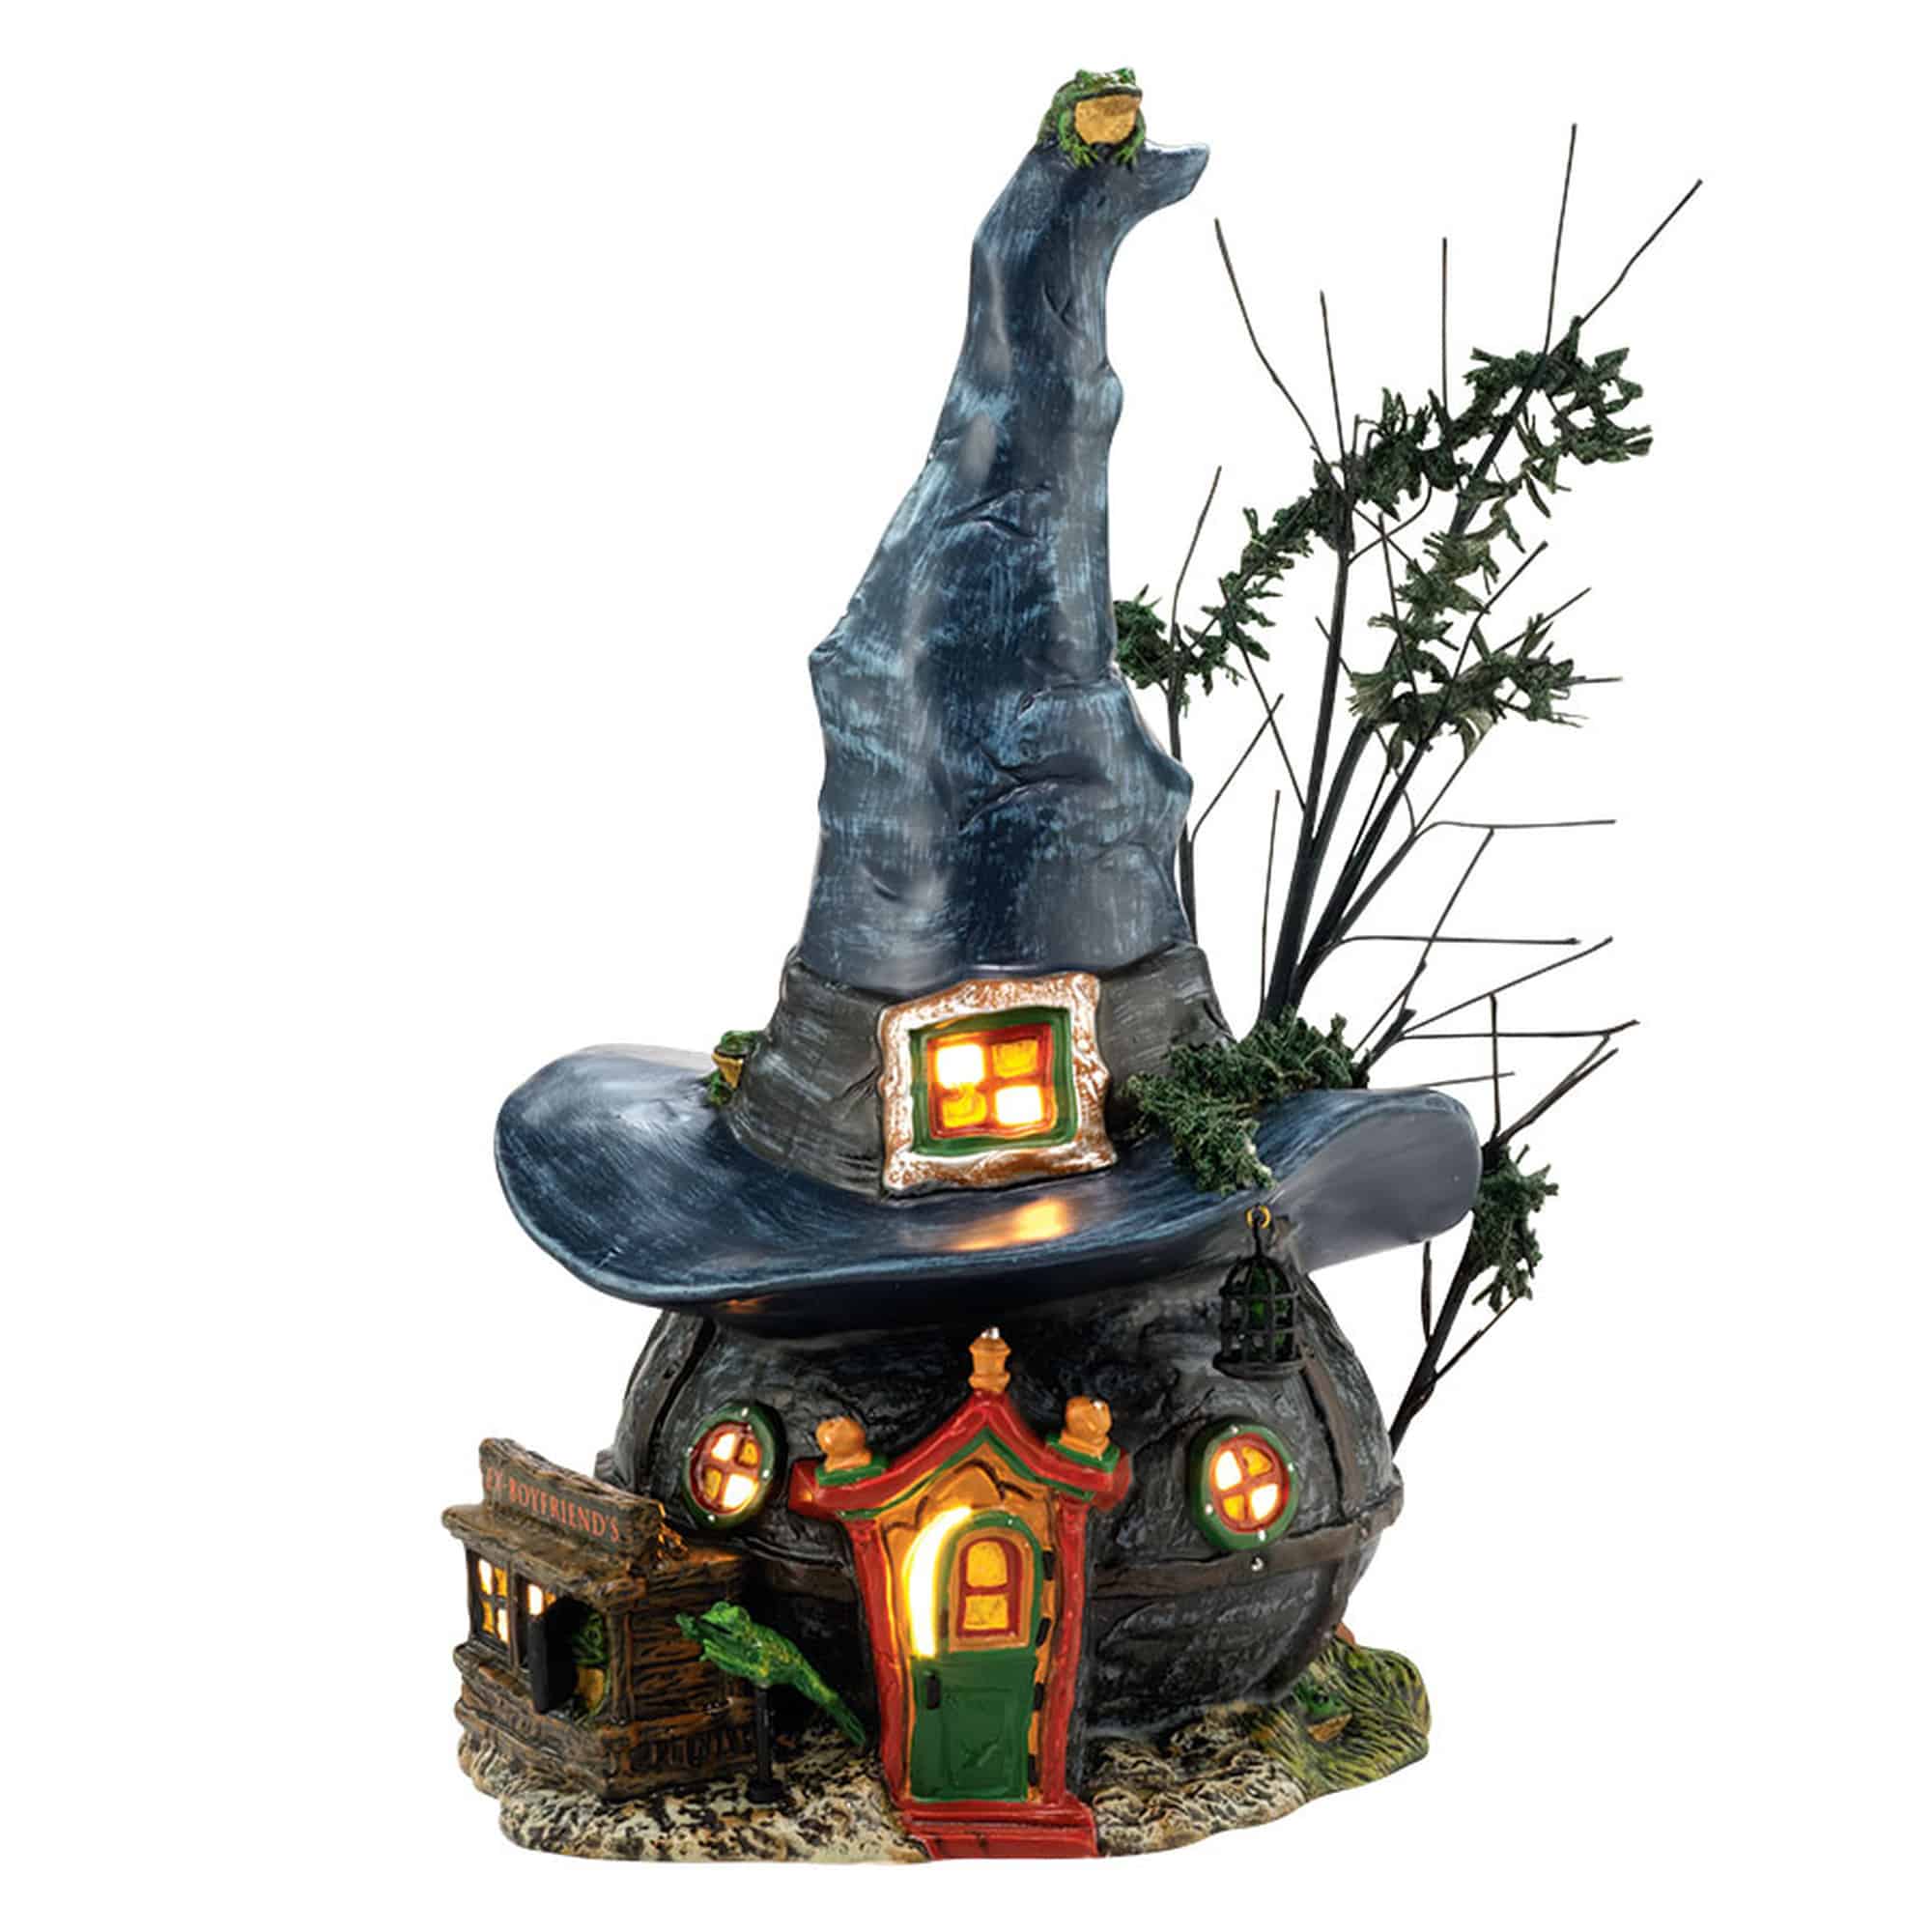 Department 56 Snow Village Halloween Toads and Frogs Witchcraft Haunt